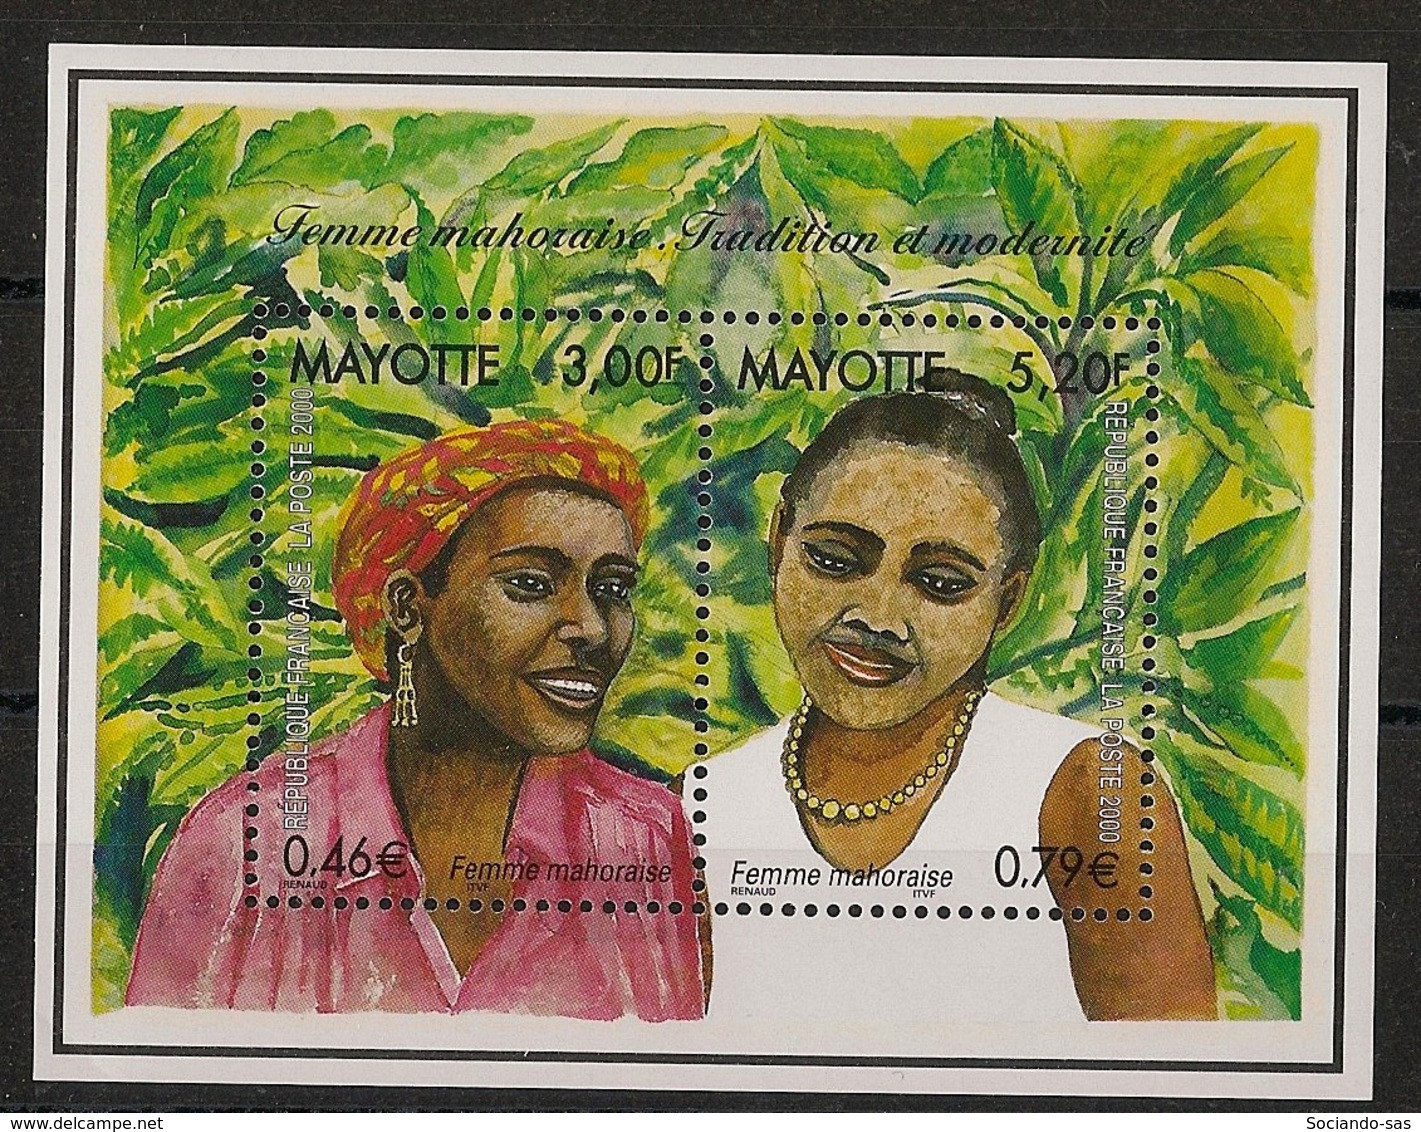 Mayotte - 2000 - Bloc Feuillet N°Yv. 3 - Femme Mahoraise - Neuf Luxe ** / MNH / Postfrisch - Blocks & Sheetlets